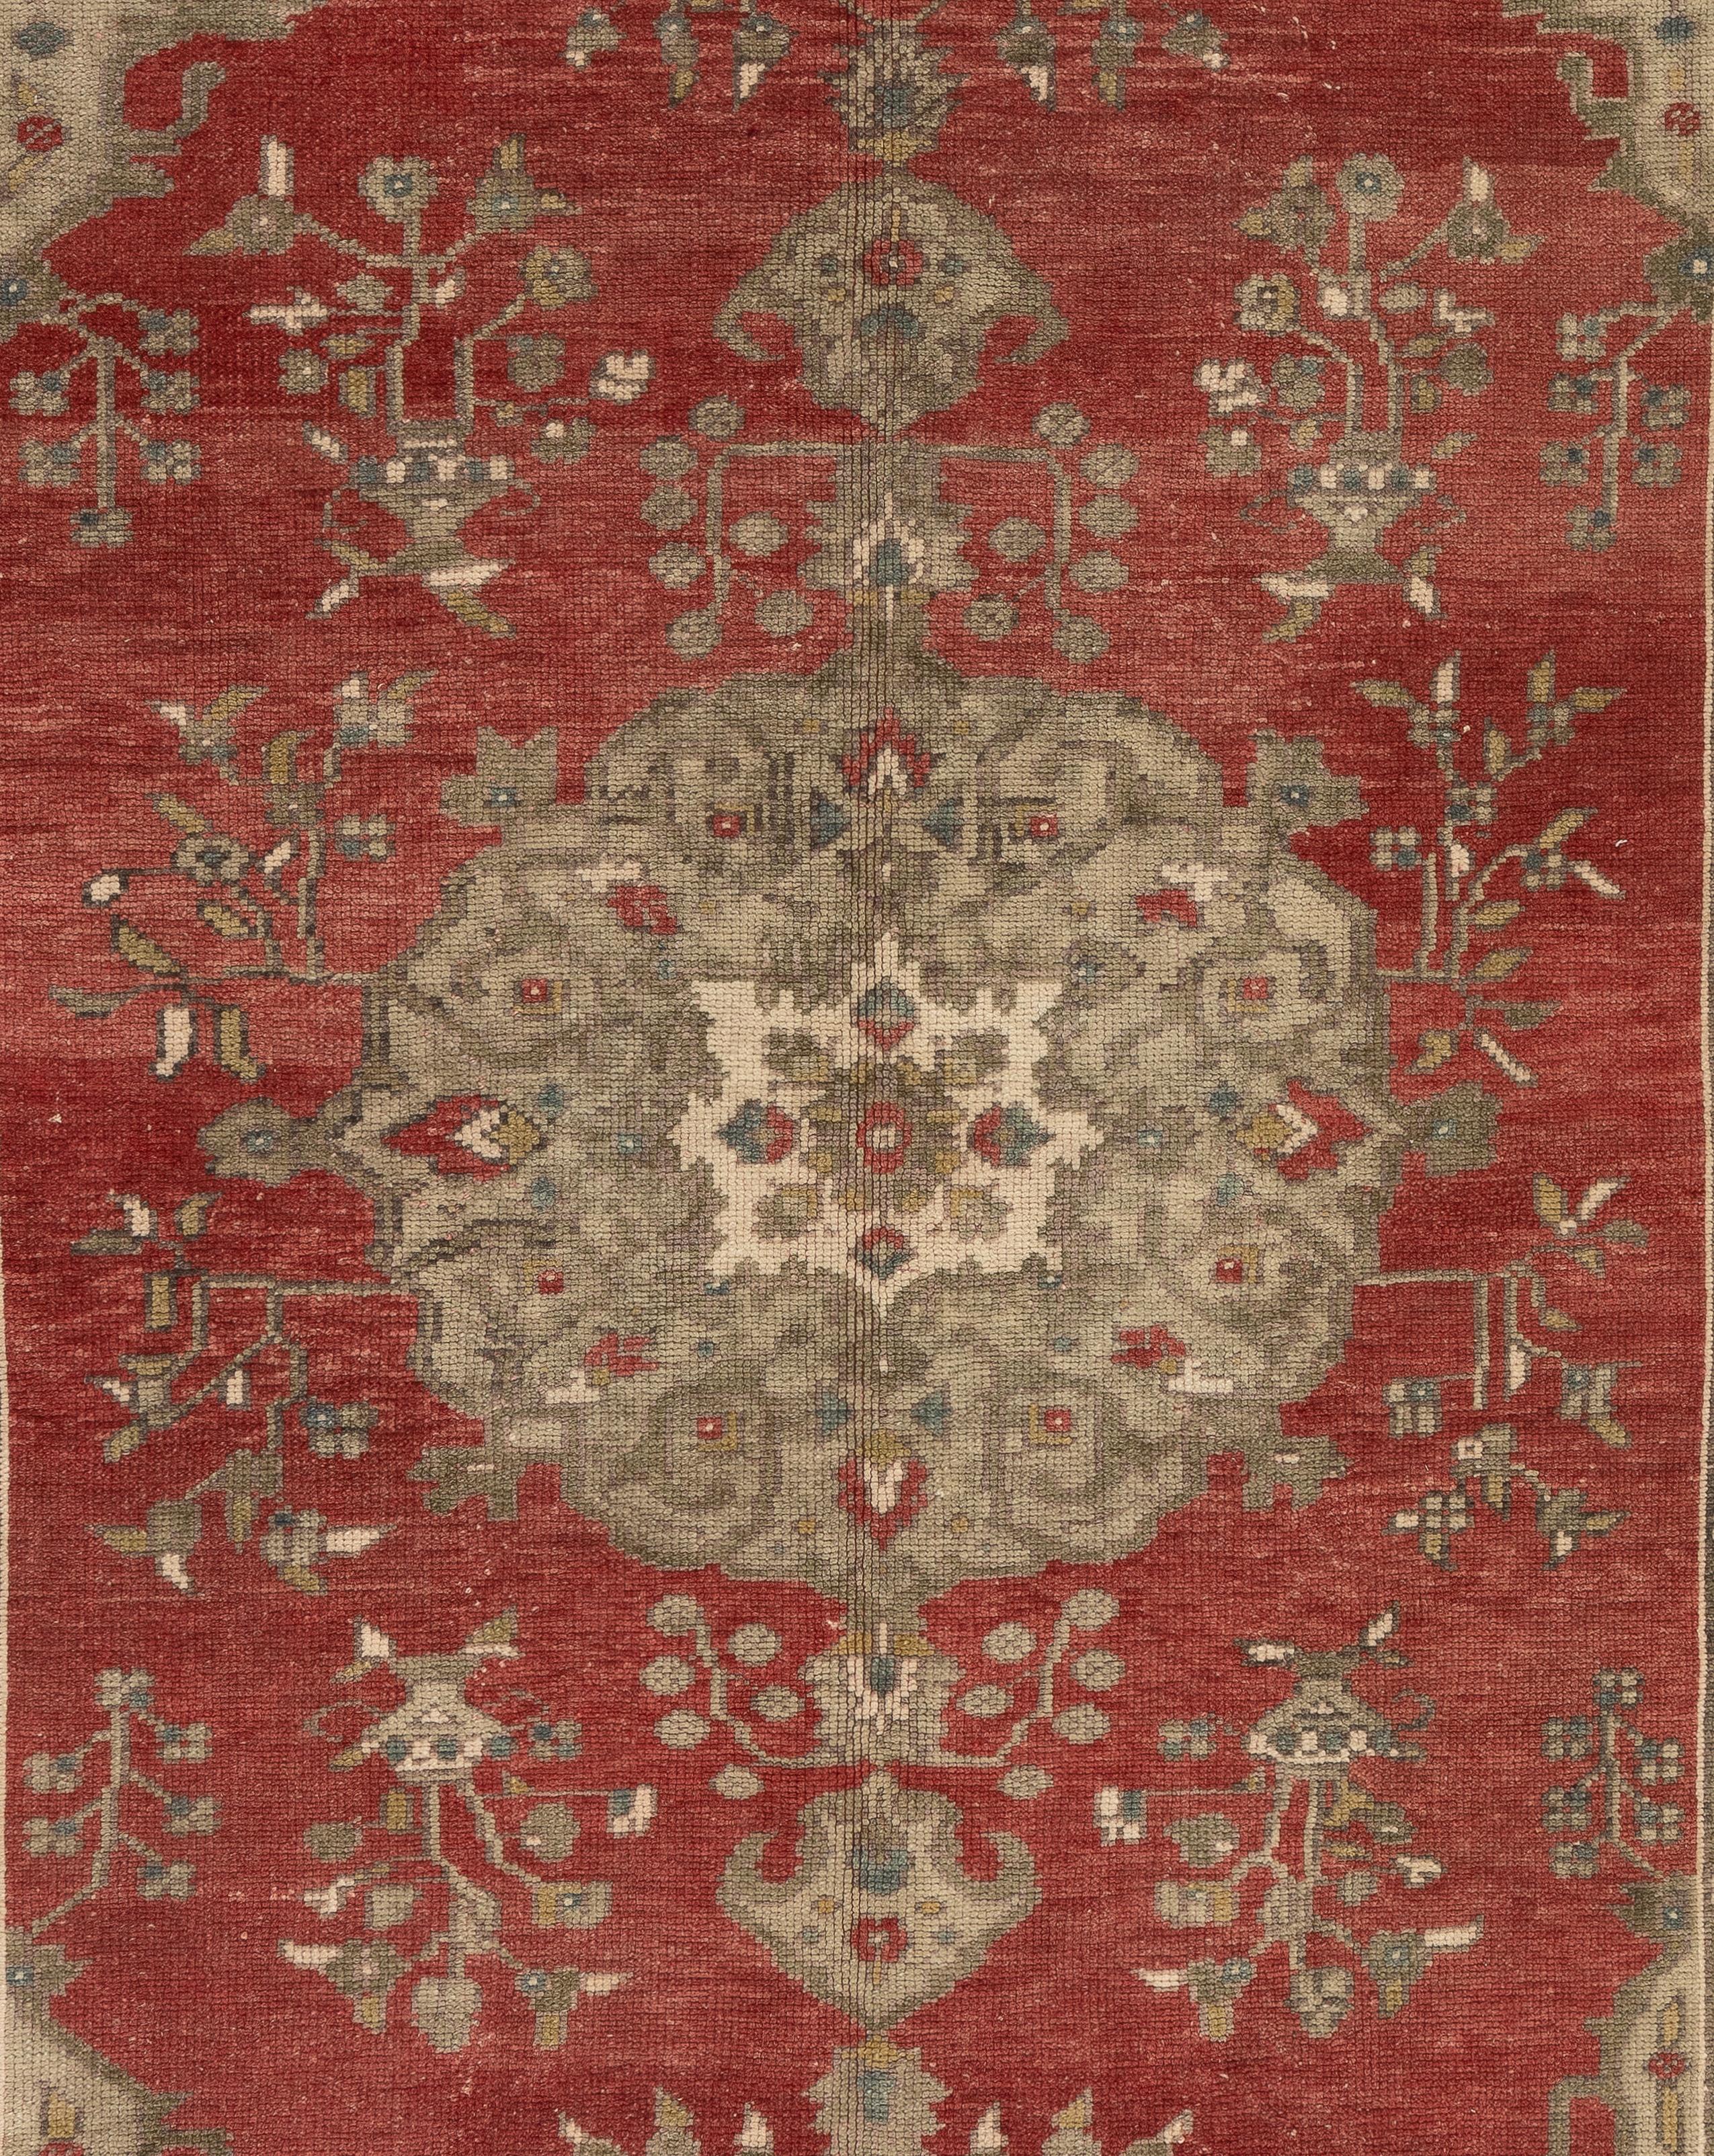 Hand-Knotted 5.5x8.6 Ft Antique Turkish Bergama Rug, circa 1920, One-of-a-kind Carpet For Sale